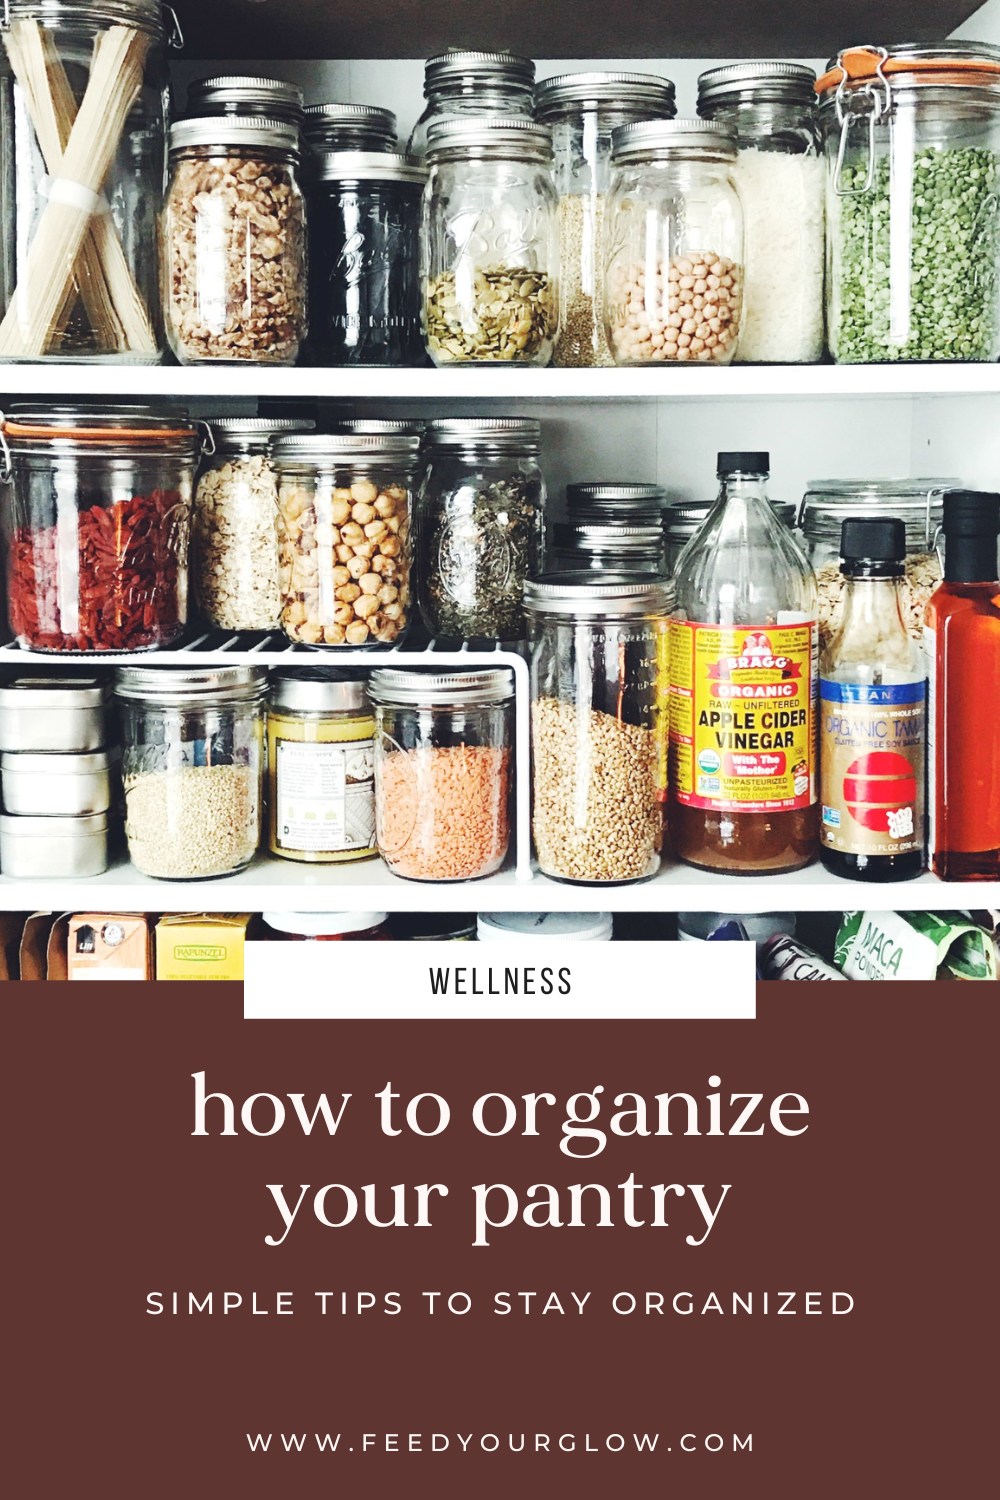 How to Organize Your Pantry | Feed Your Glow